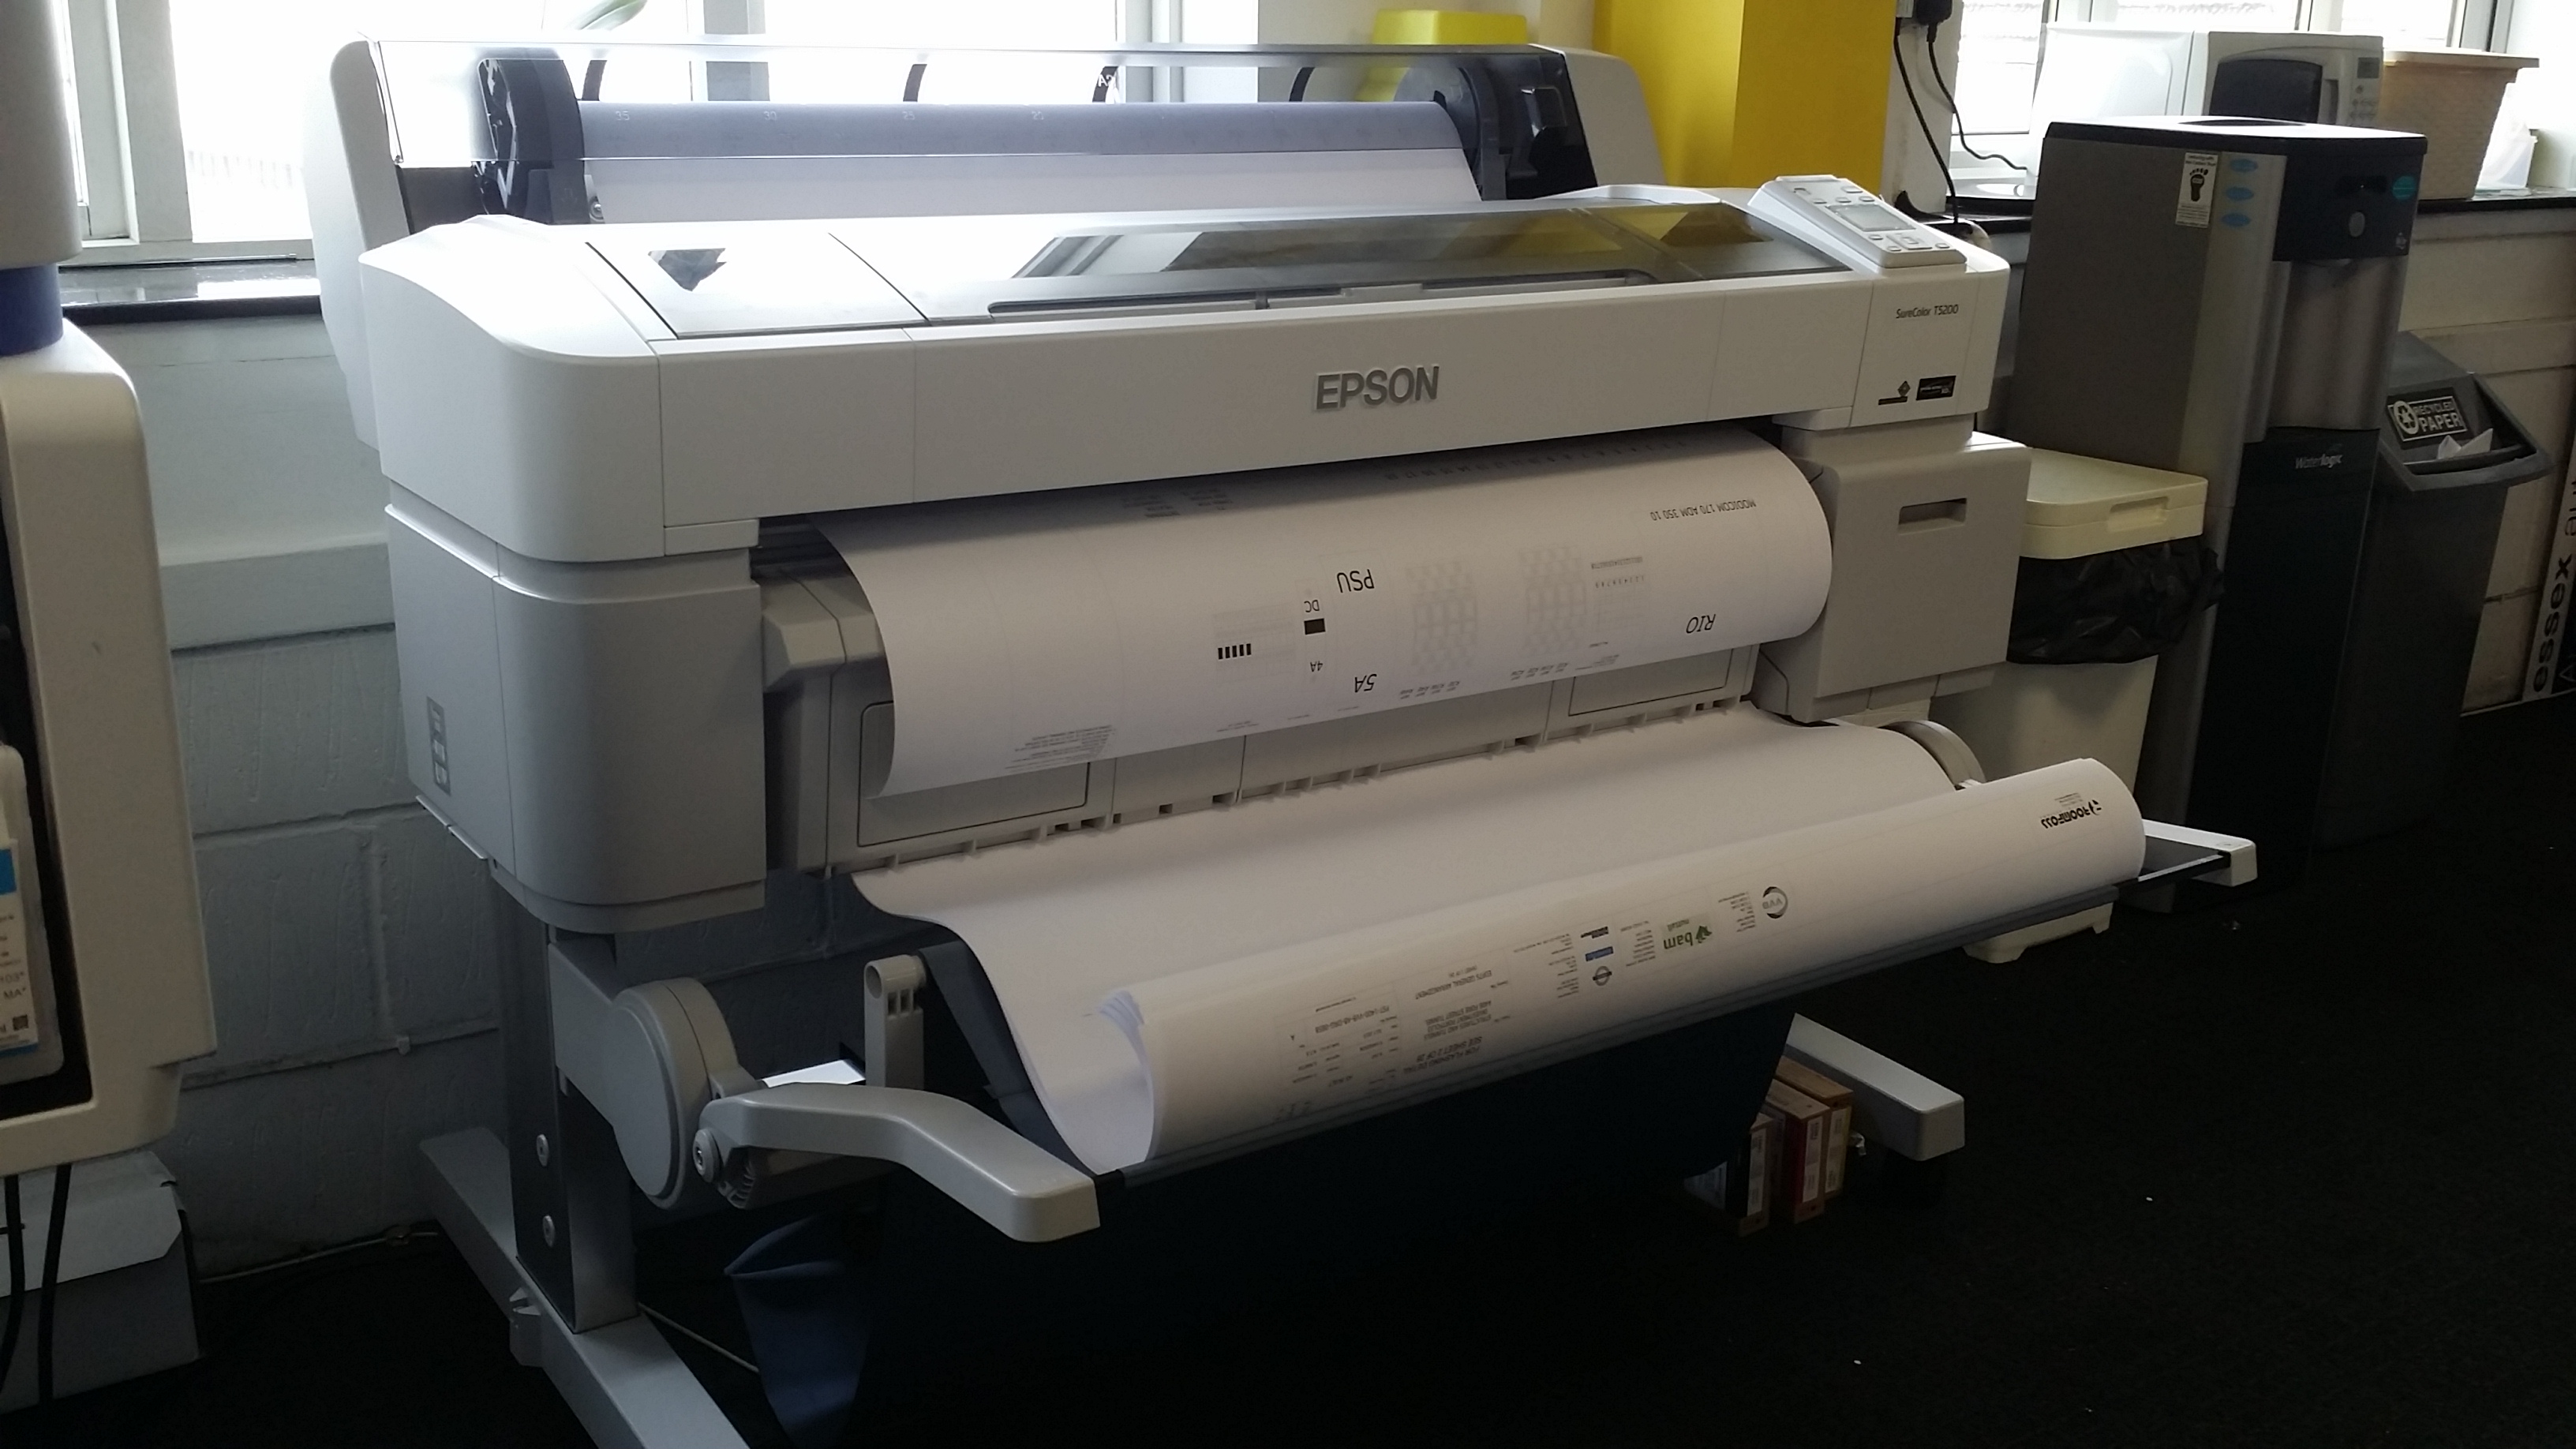 Eagle Printers Professional Printing Services A0 plans & drawings